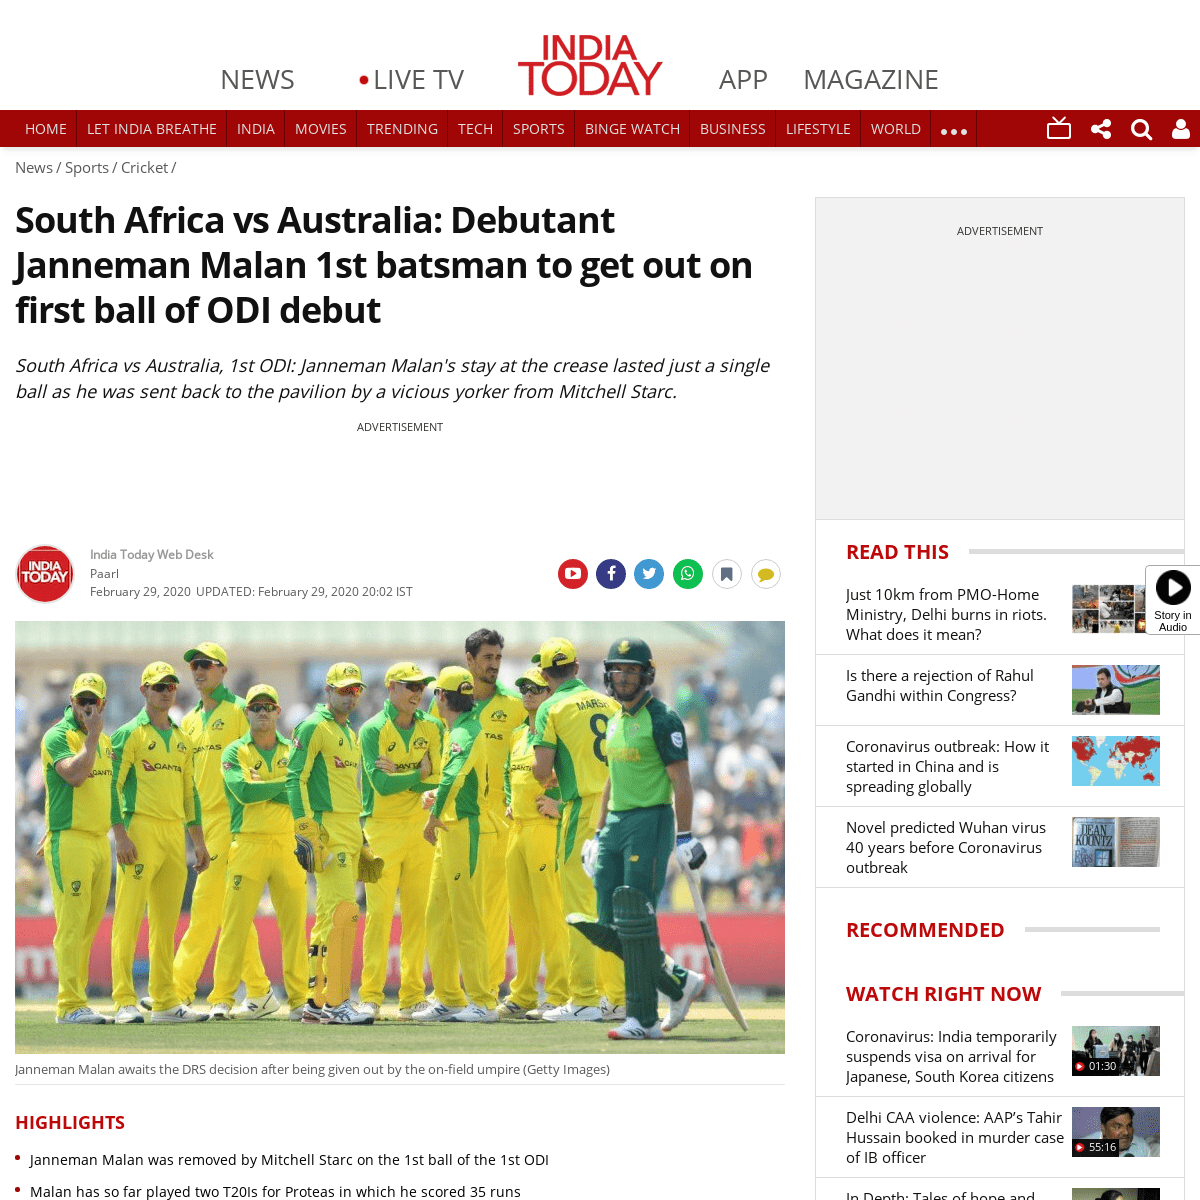 A complete backup of www.indiatoday.in/sports/cricket/story/south-africa-vs-australia-1st-odi-janneman-malan-debut-out-1st-ball-